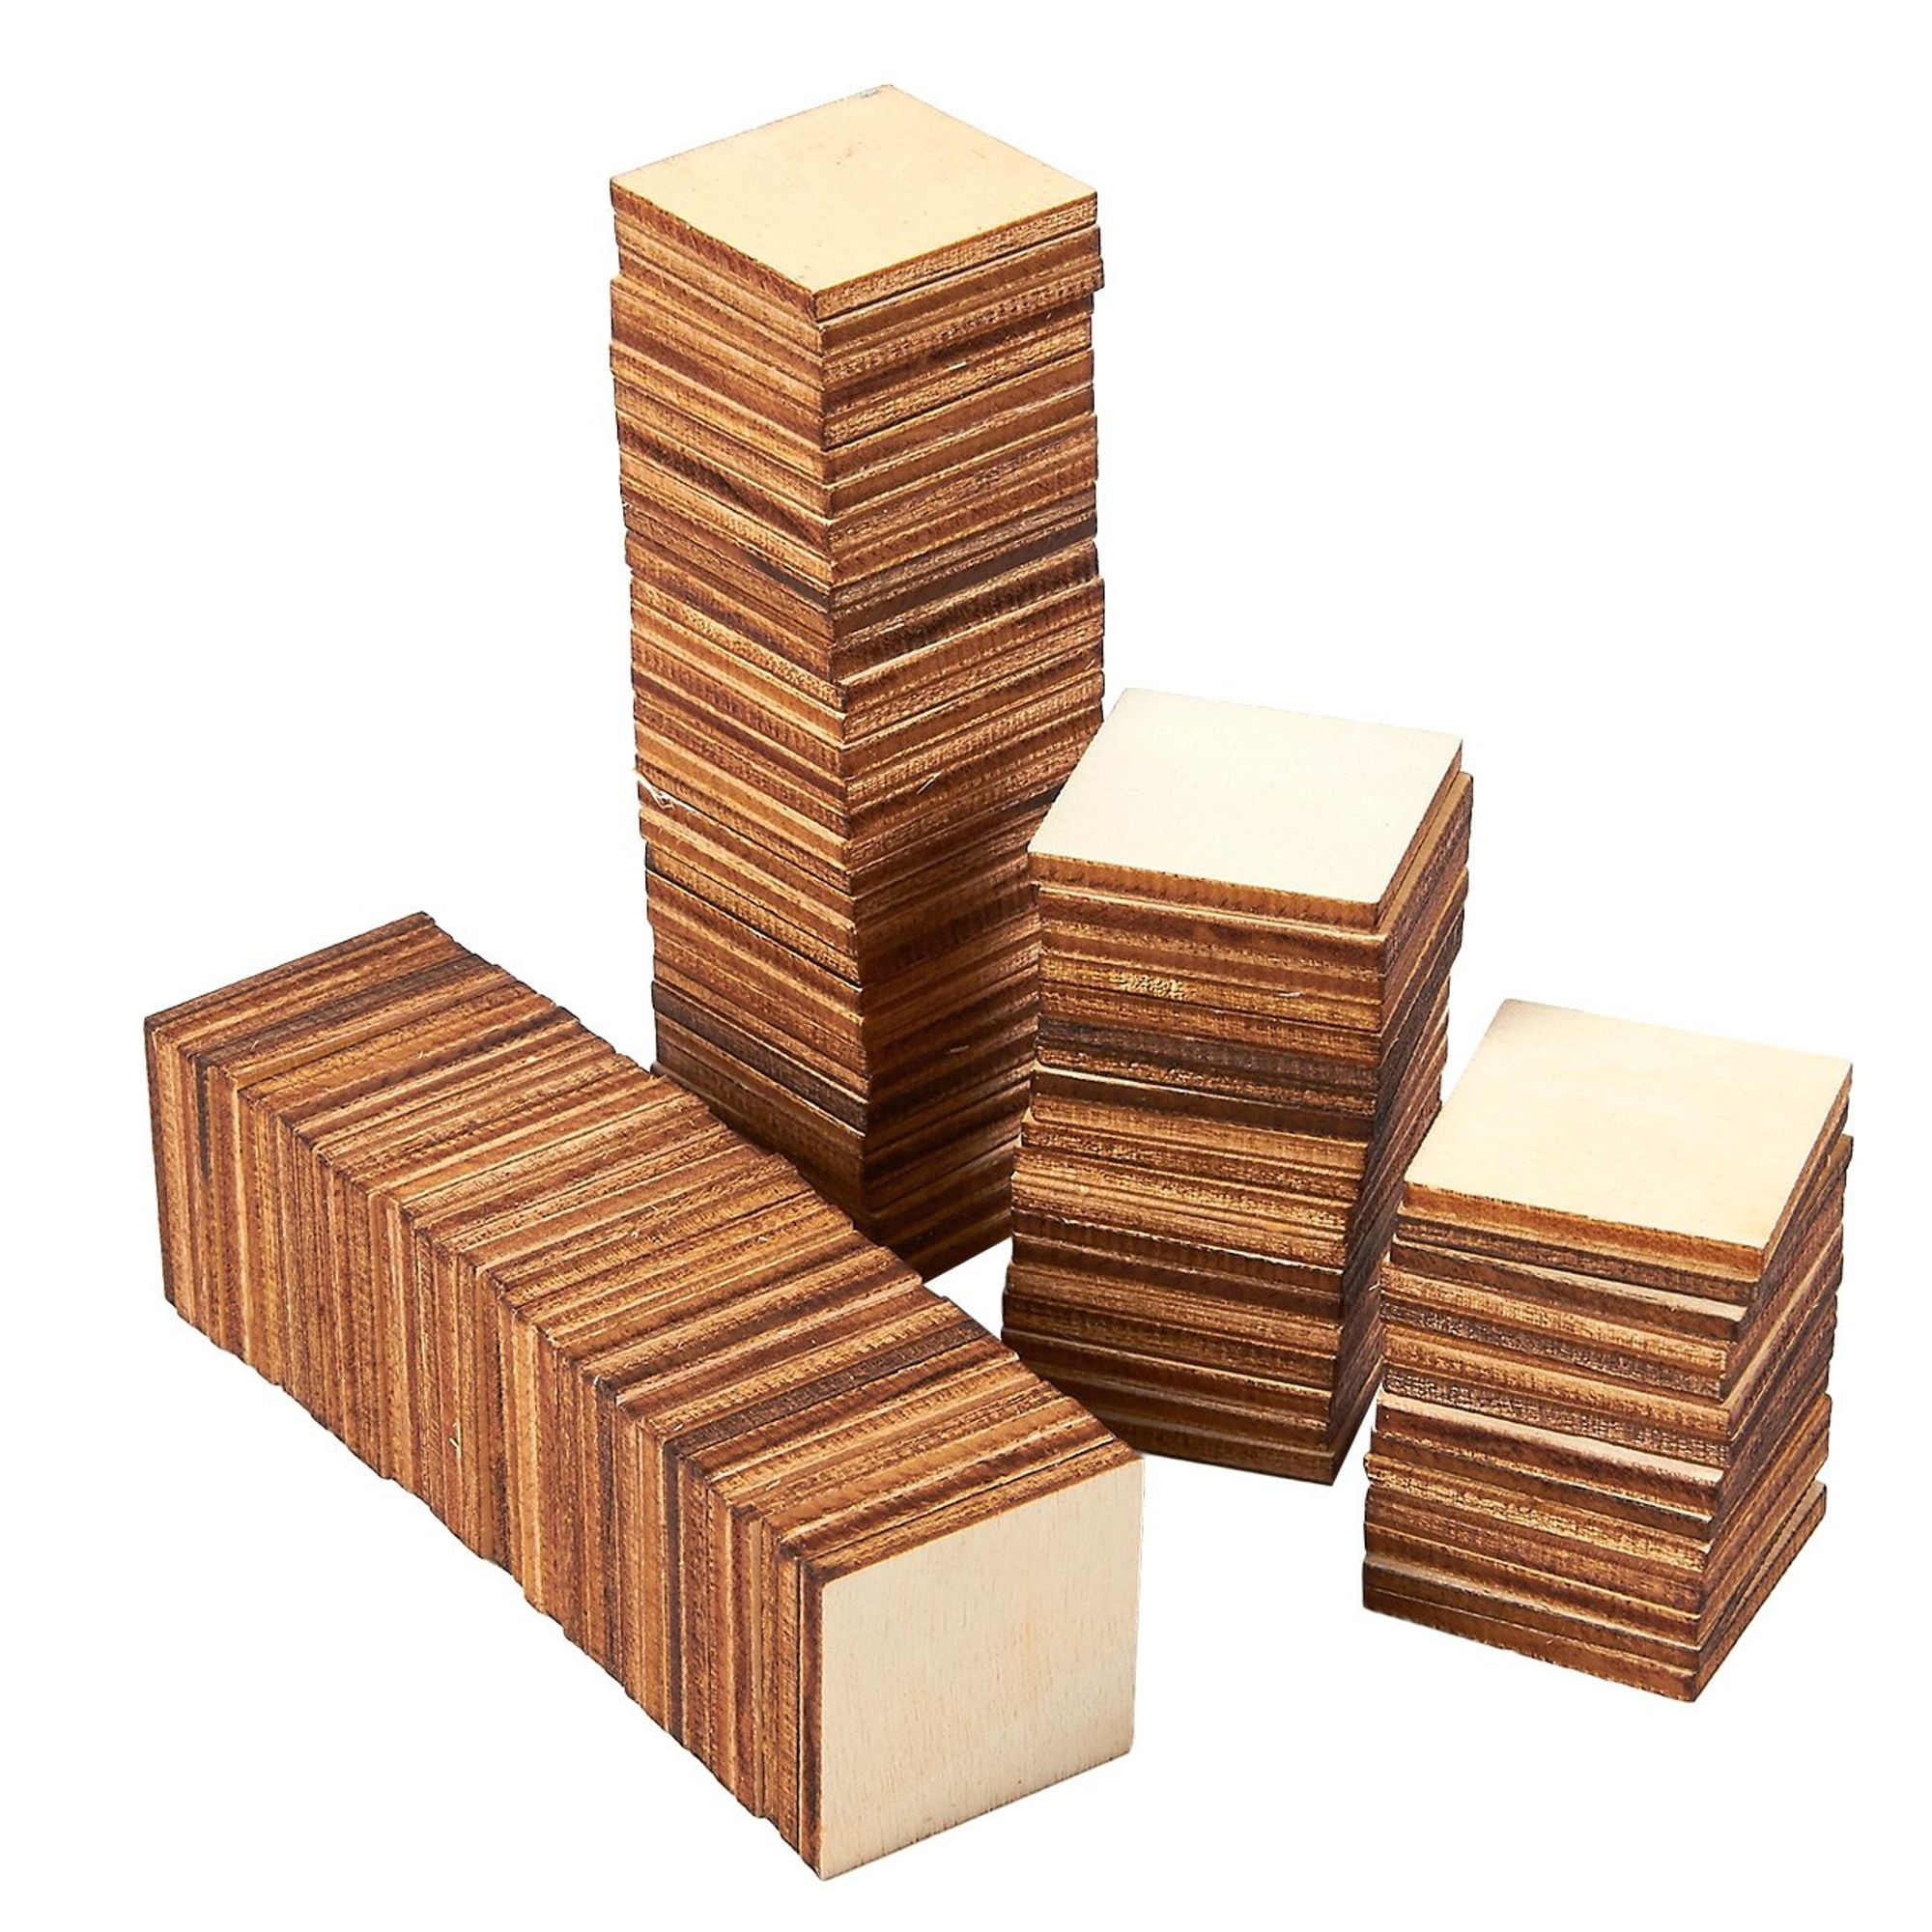 wood squares for crafts